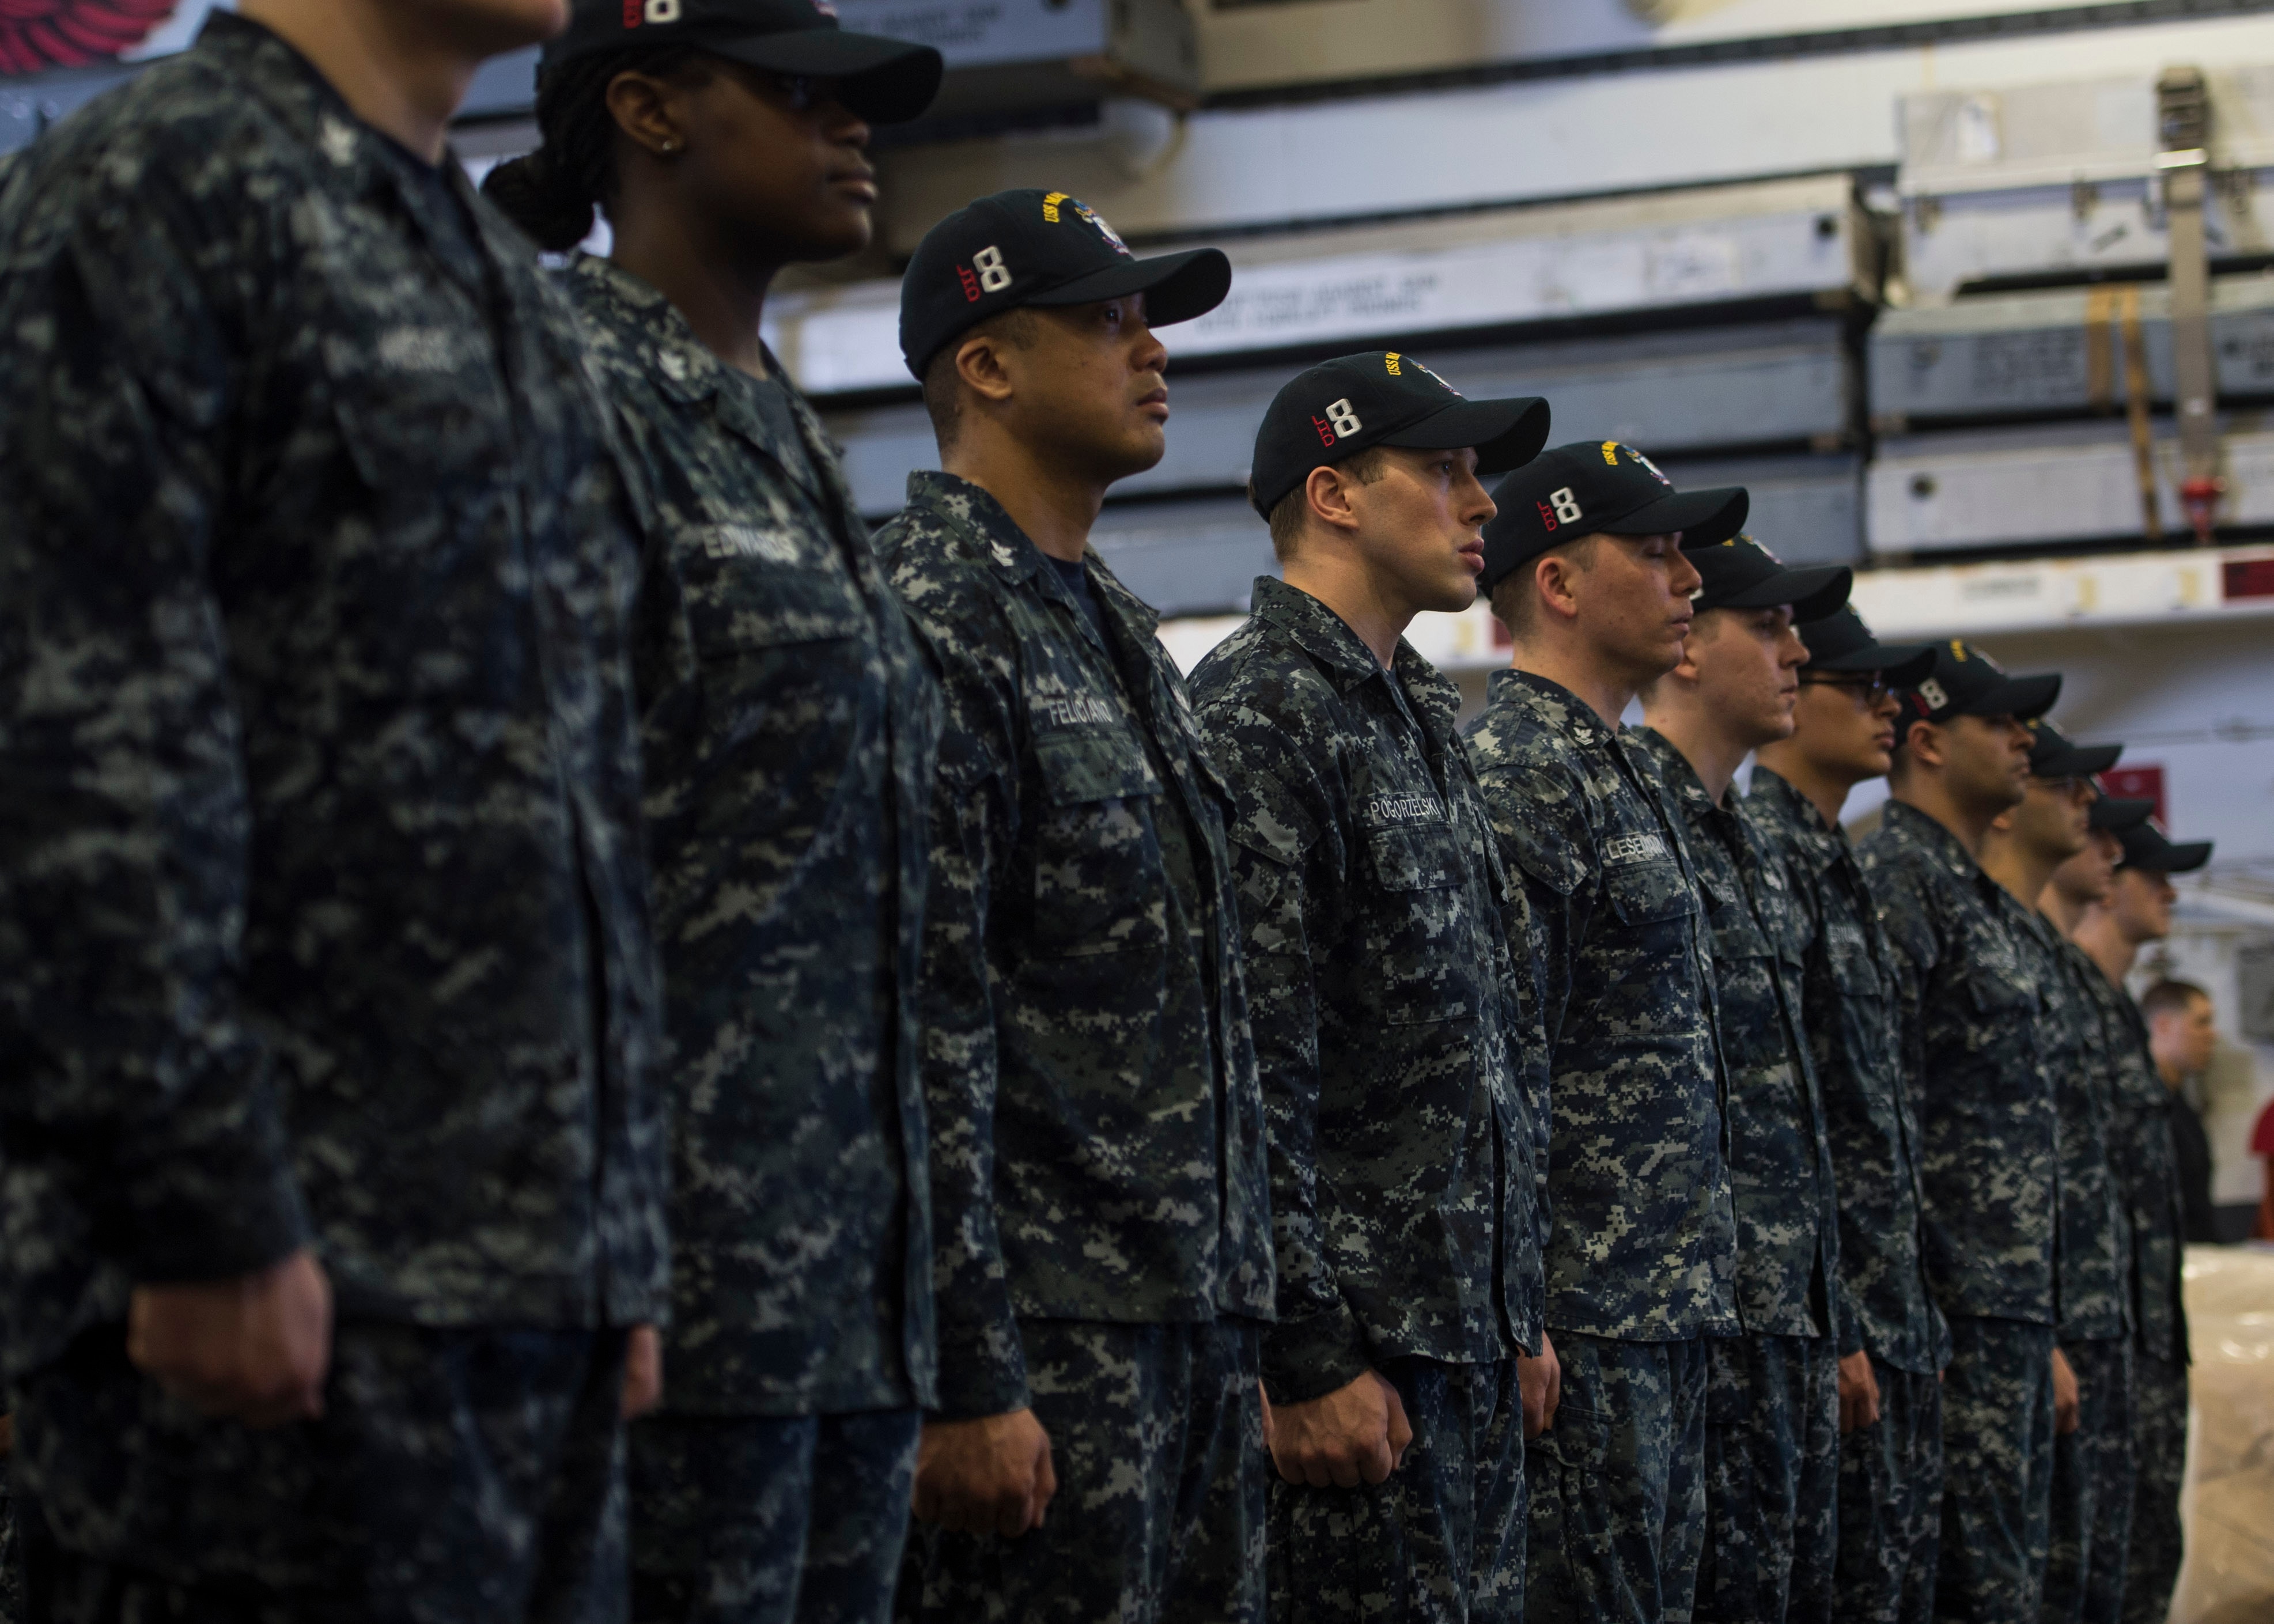 Posting private nude photos is now a crime in the Navy and Marine Corps image